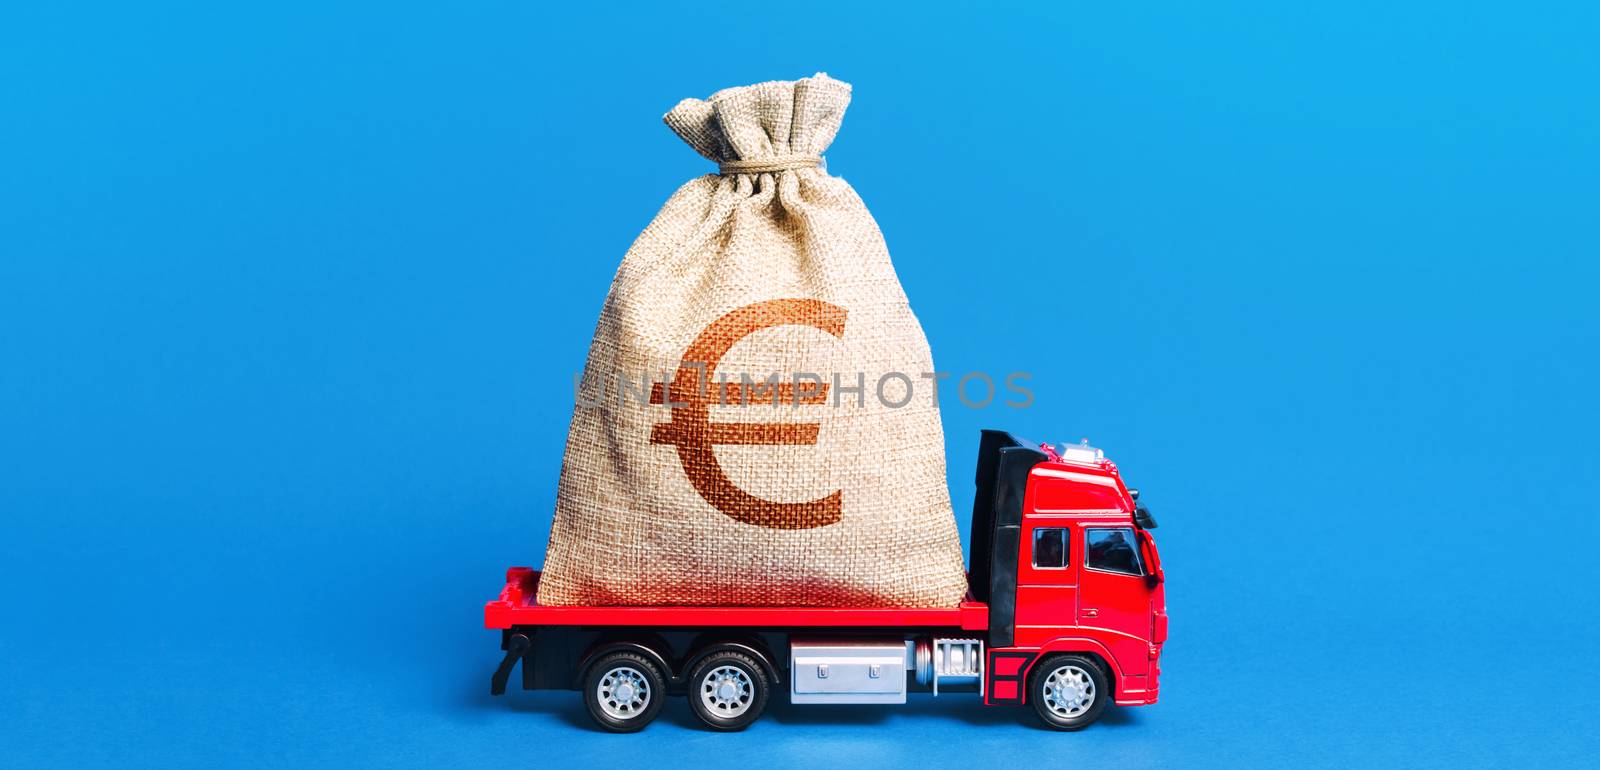 The truck is carrying a huge euro money bag. Great investment. Anti-crisis measures of government. Attracting large funds to the economy for subsidies, support and cheap soft loans for businesses.